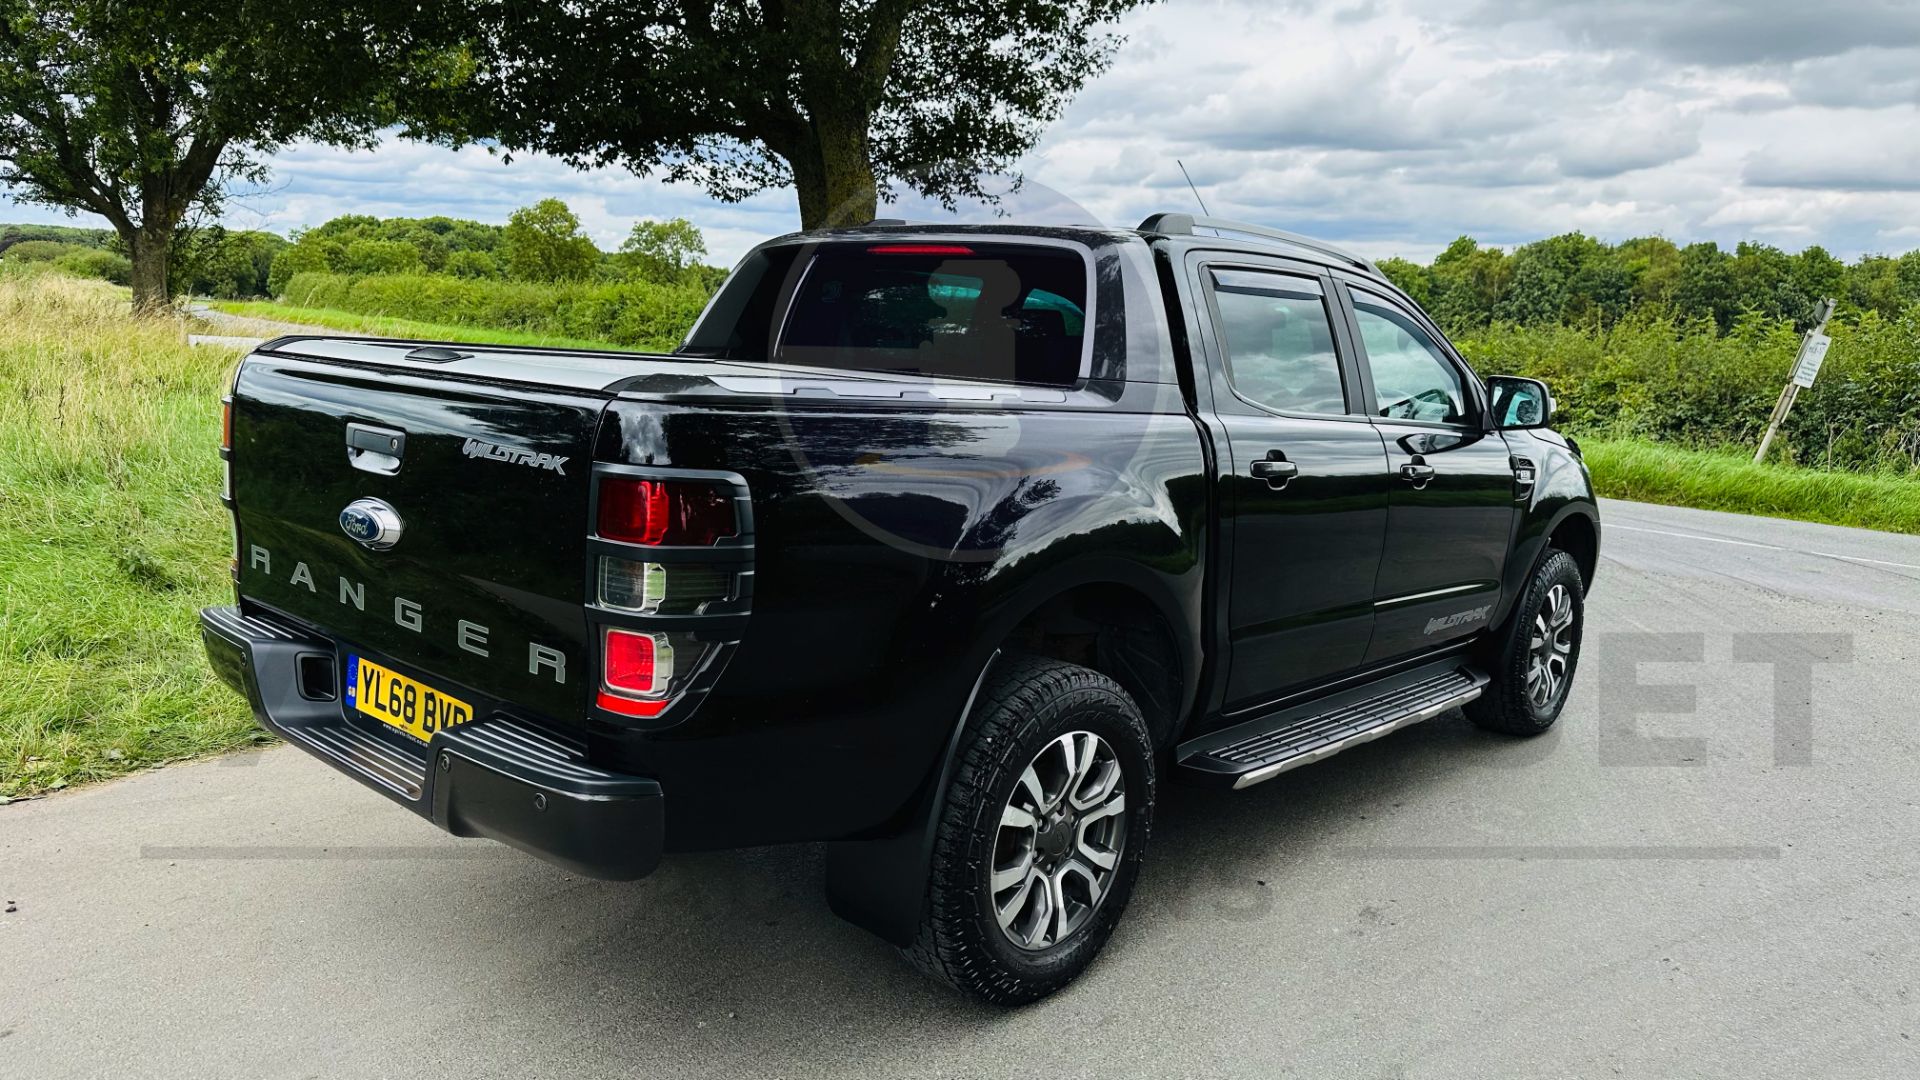 (On Sale) FORD RANGER *WILDTRAK* DOUBLE CAB PICK-UP (2019 - EURO 6) 3.2 TDCI - STOP/START (1 OWNER) - Image 12 of 50